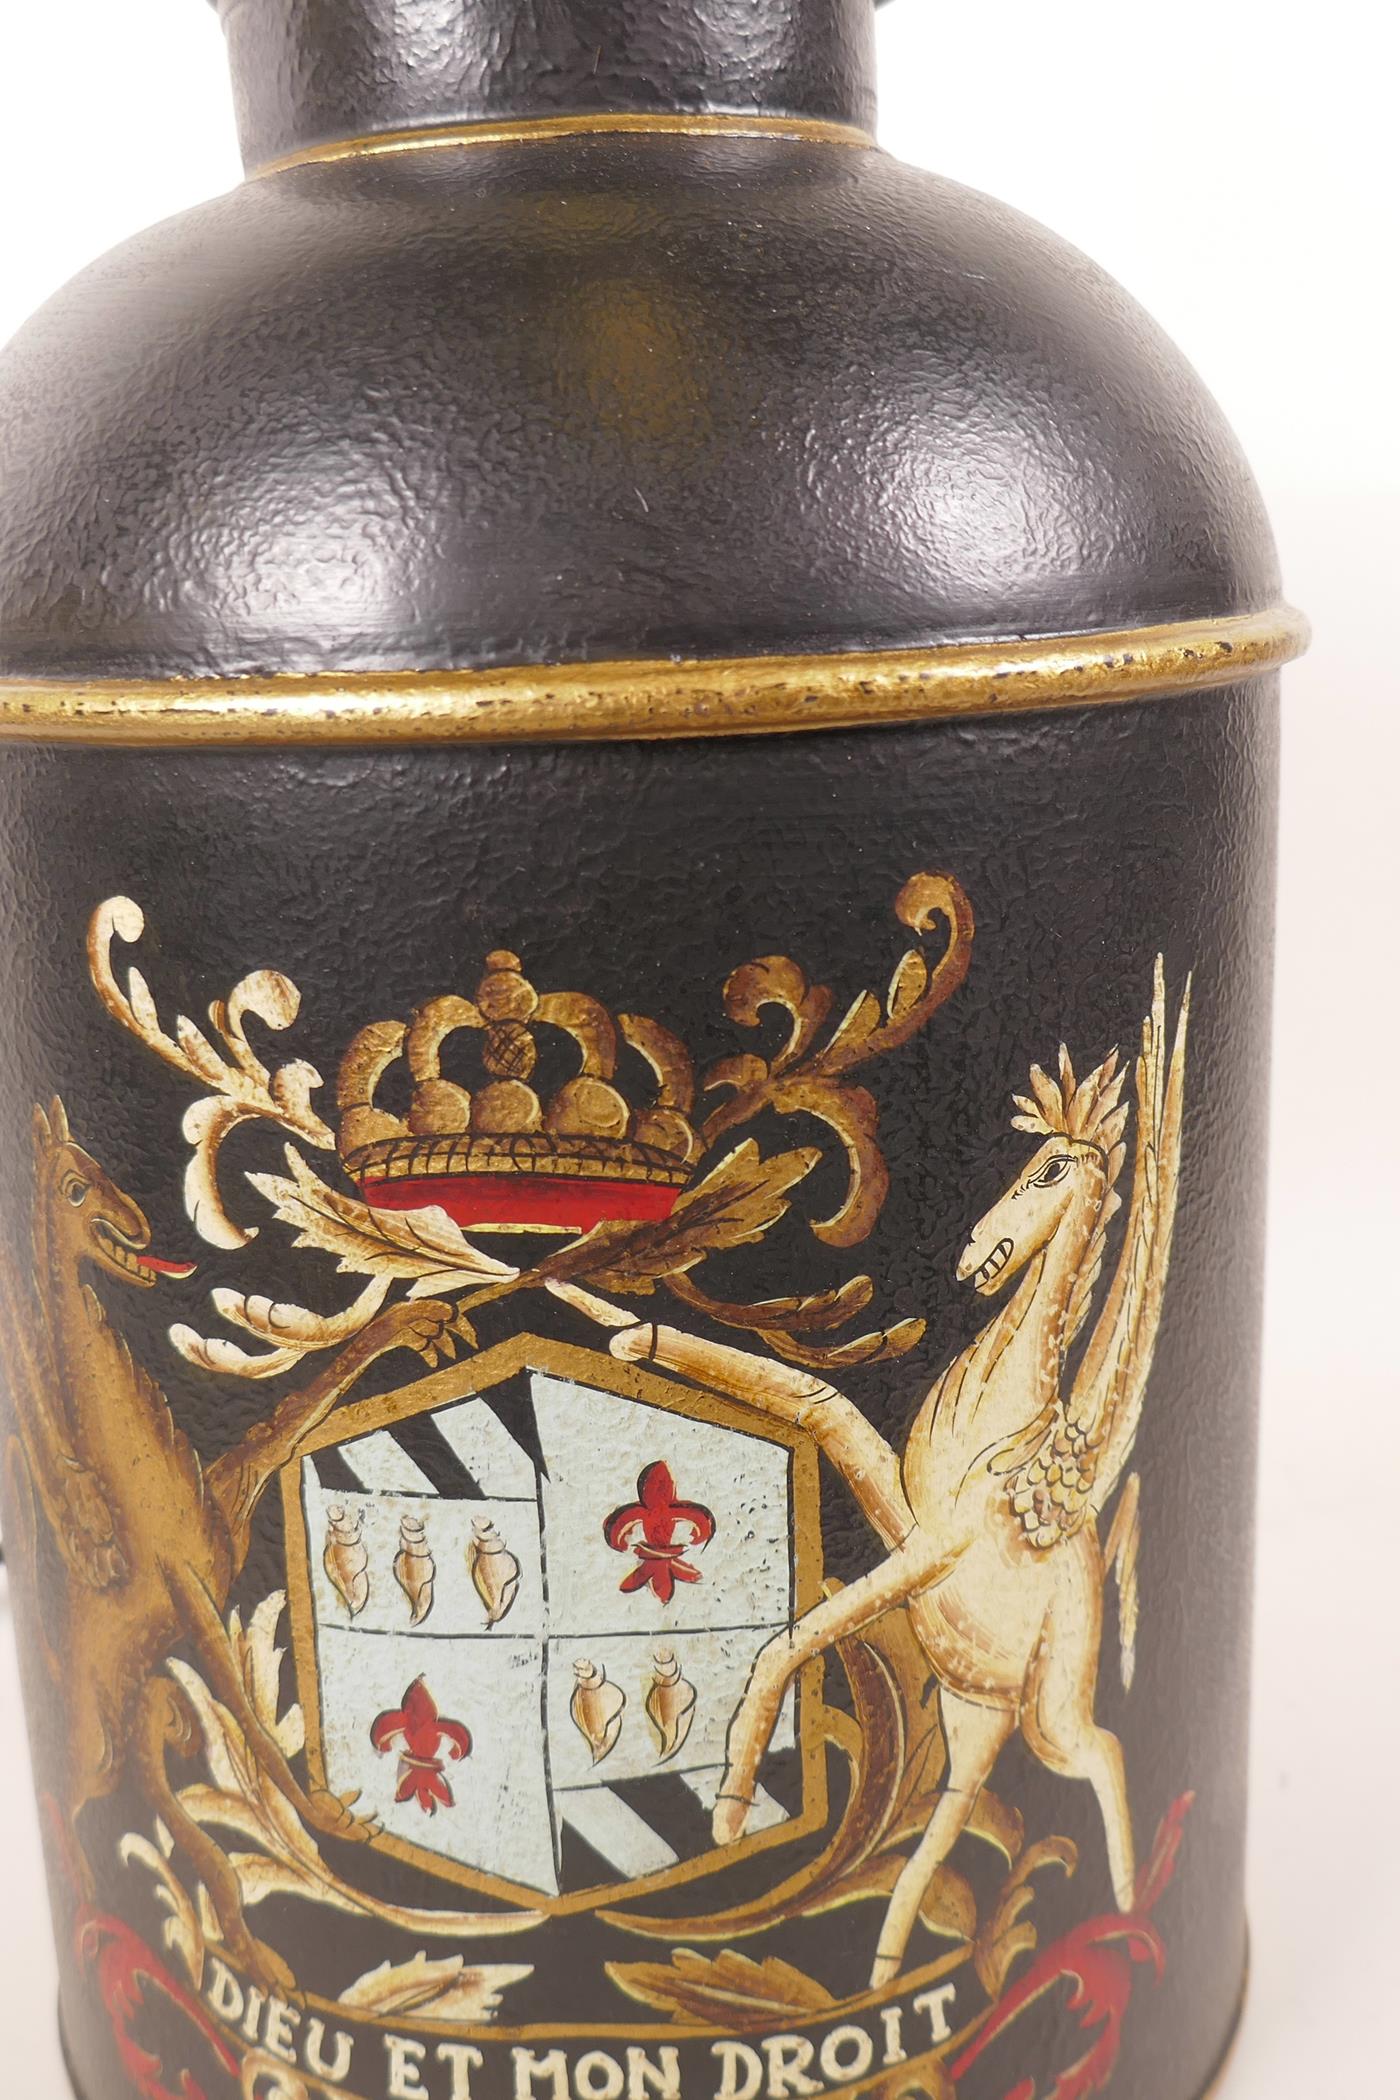 A metal table lamp in the form of a toleware churn and cover painted with a coat of arms, 18" high - Image 2 of 3